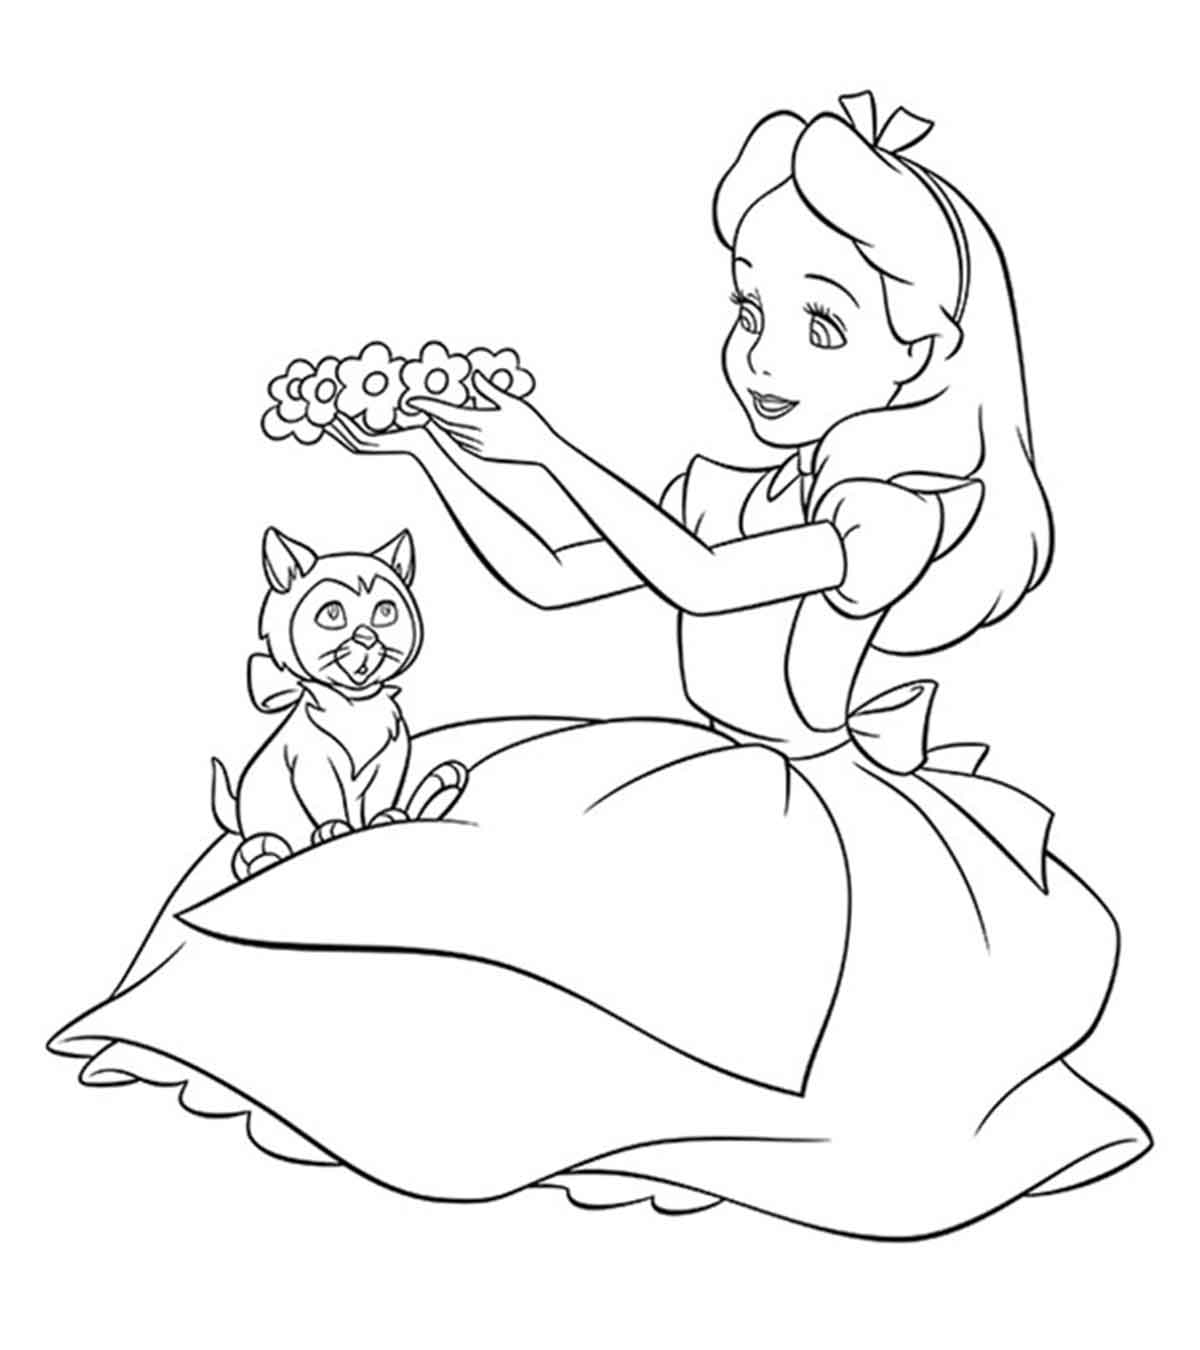 Coloring Disney Pages Disney Coloring Pages For Your Little Ones